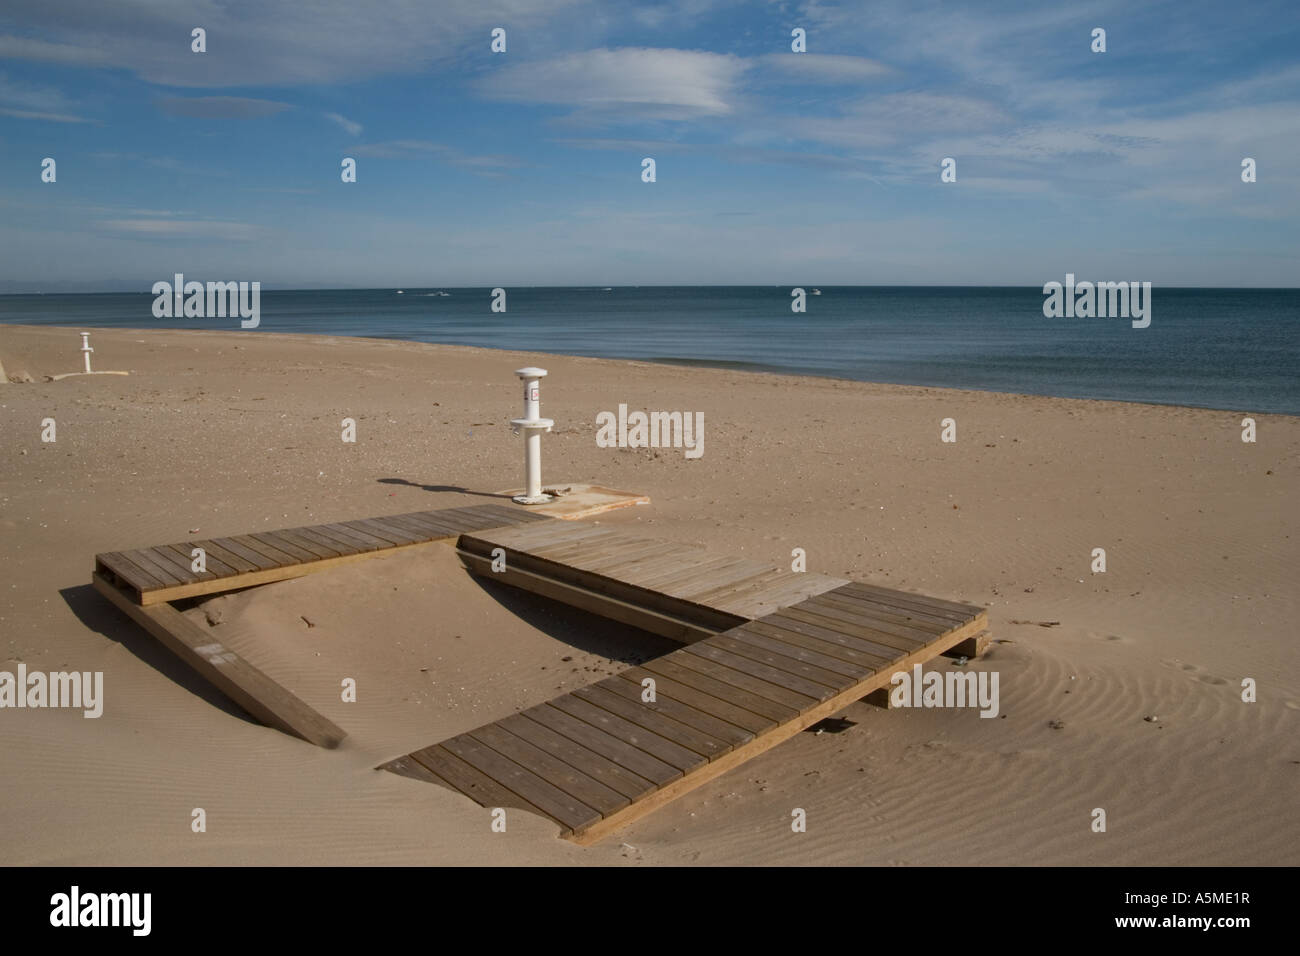 Cleaning facilities on a beach in Valencia. Stock Photo